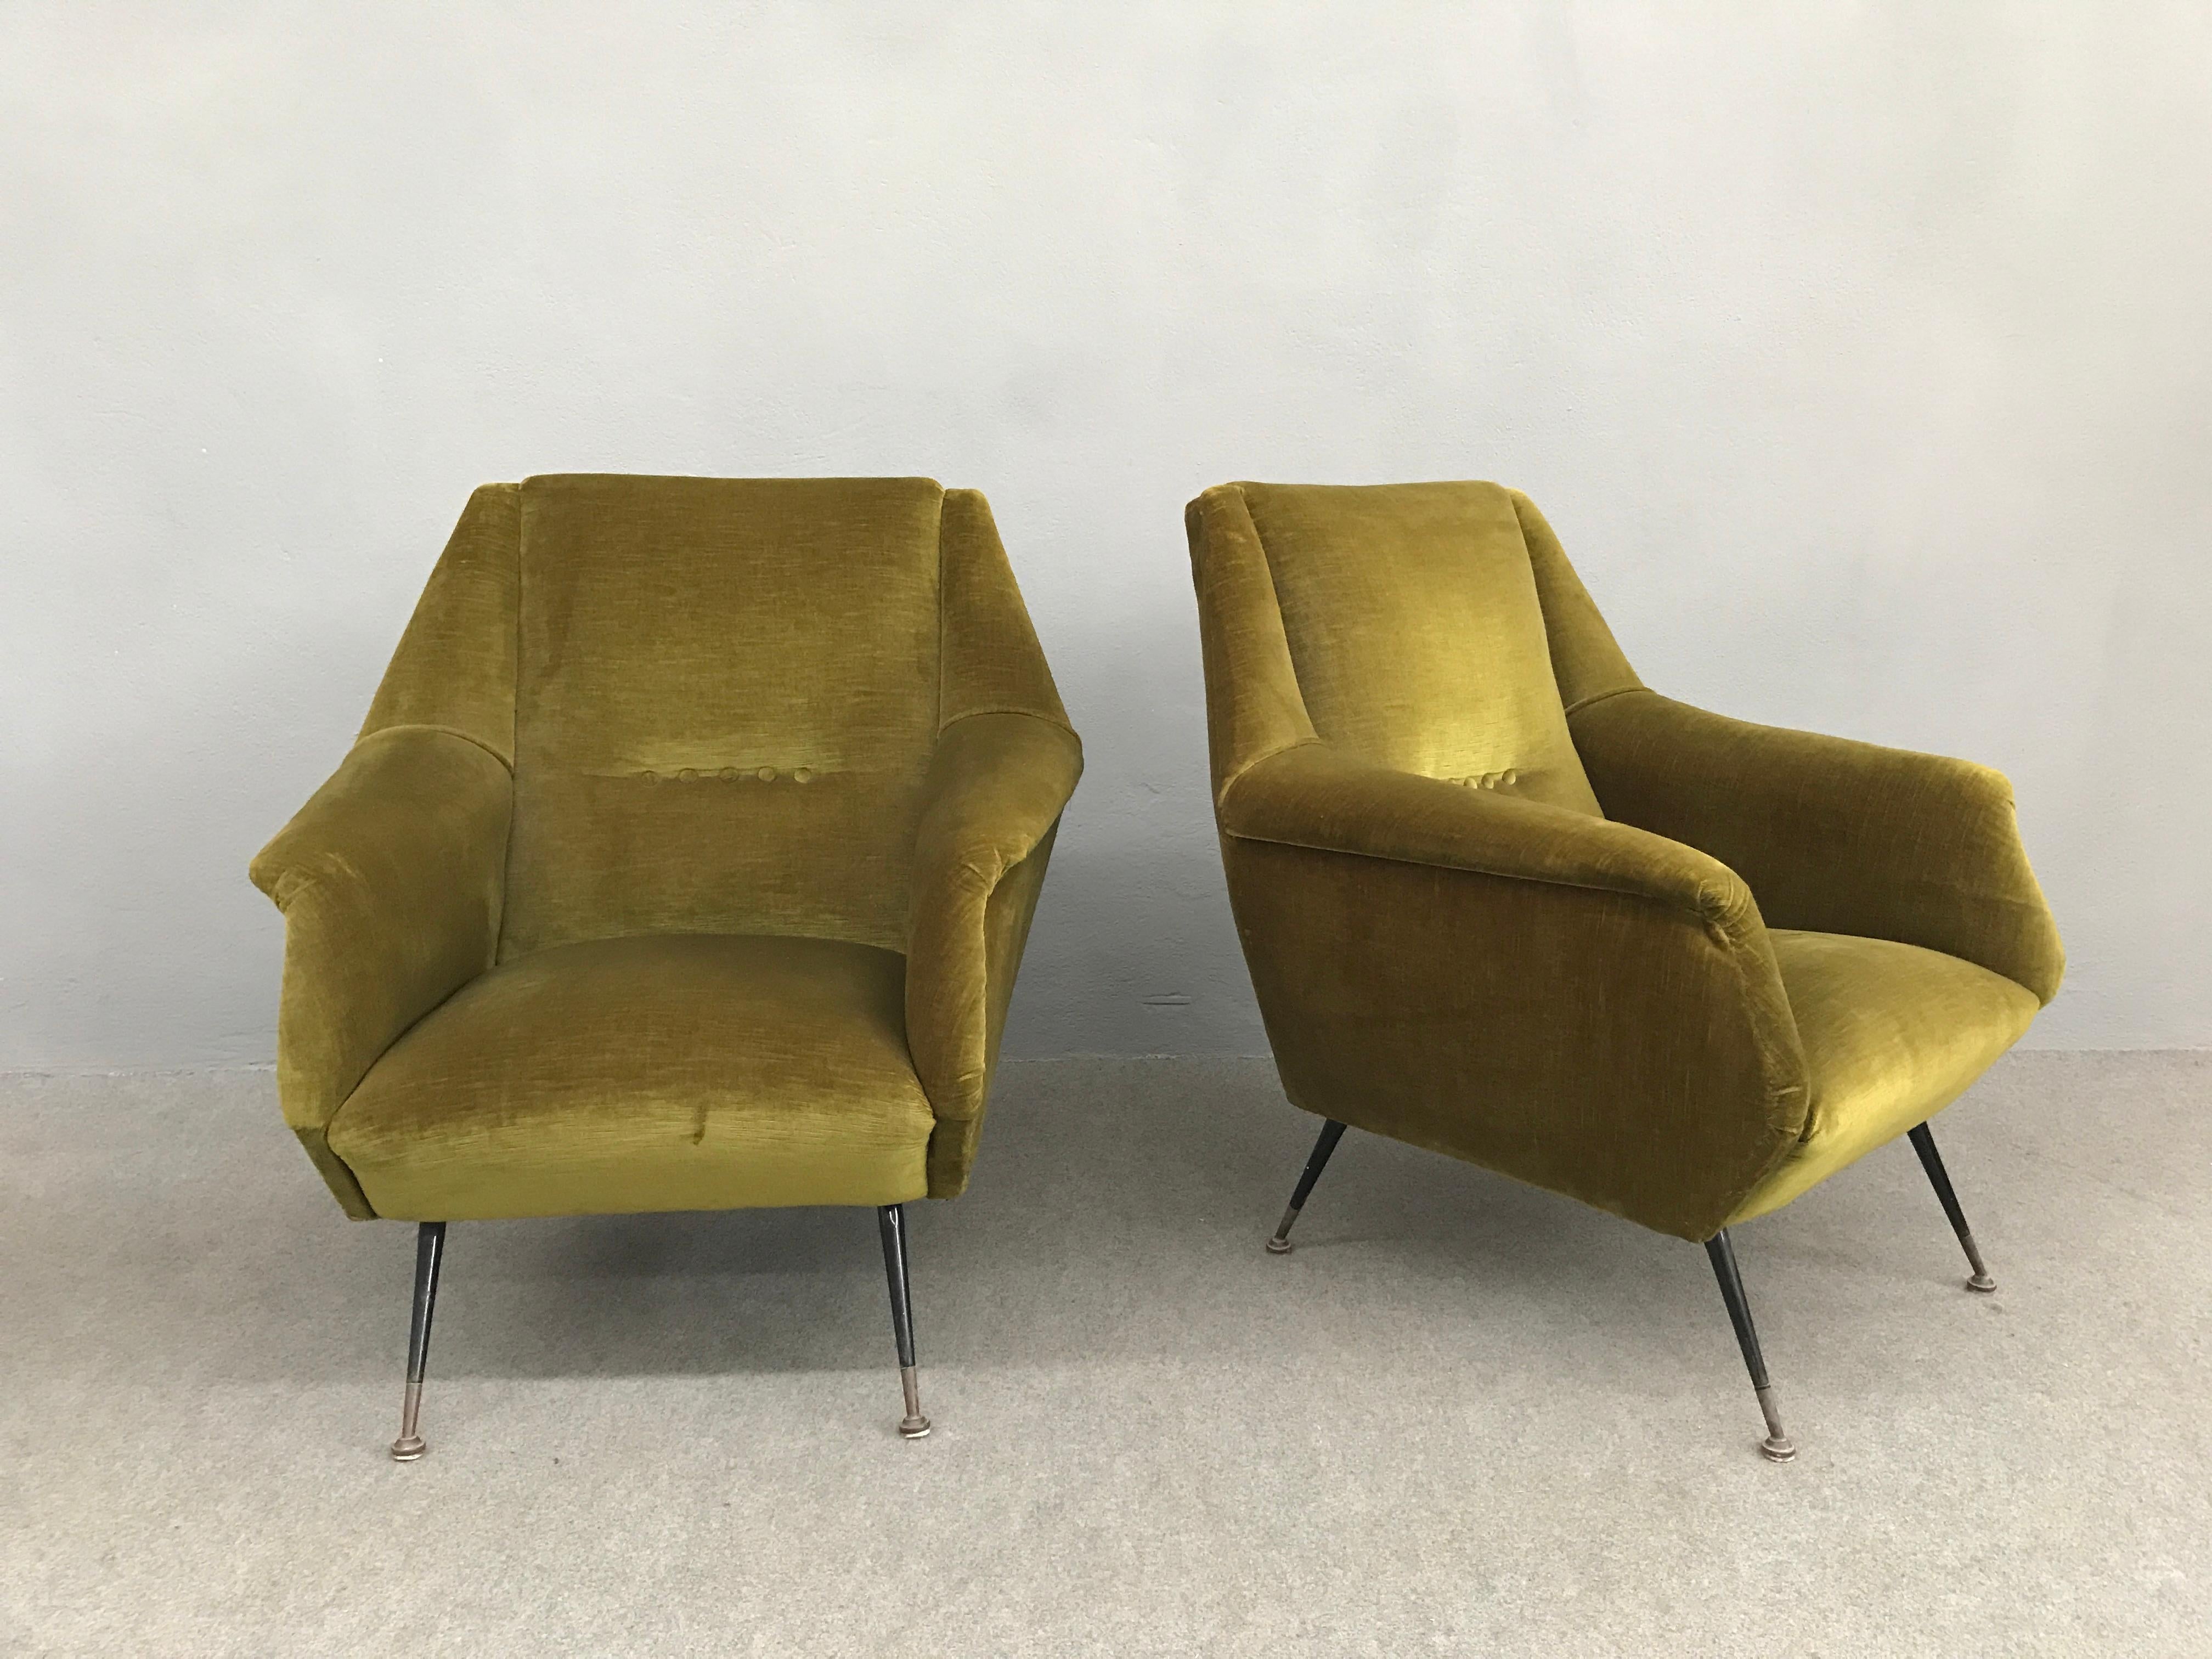 Pair of Italian armchairs with original green velvet upholstery, black laquered legs and brass sabot.